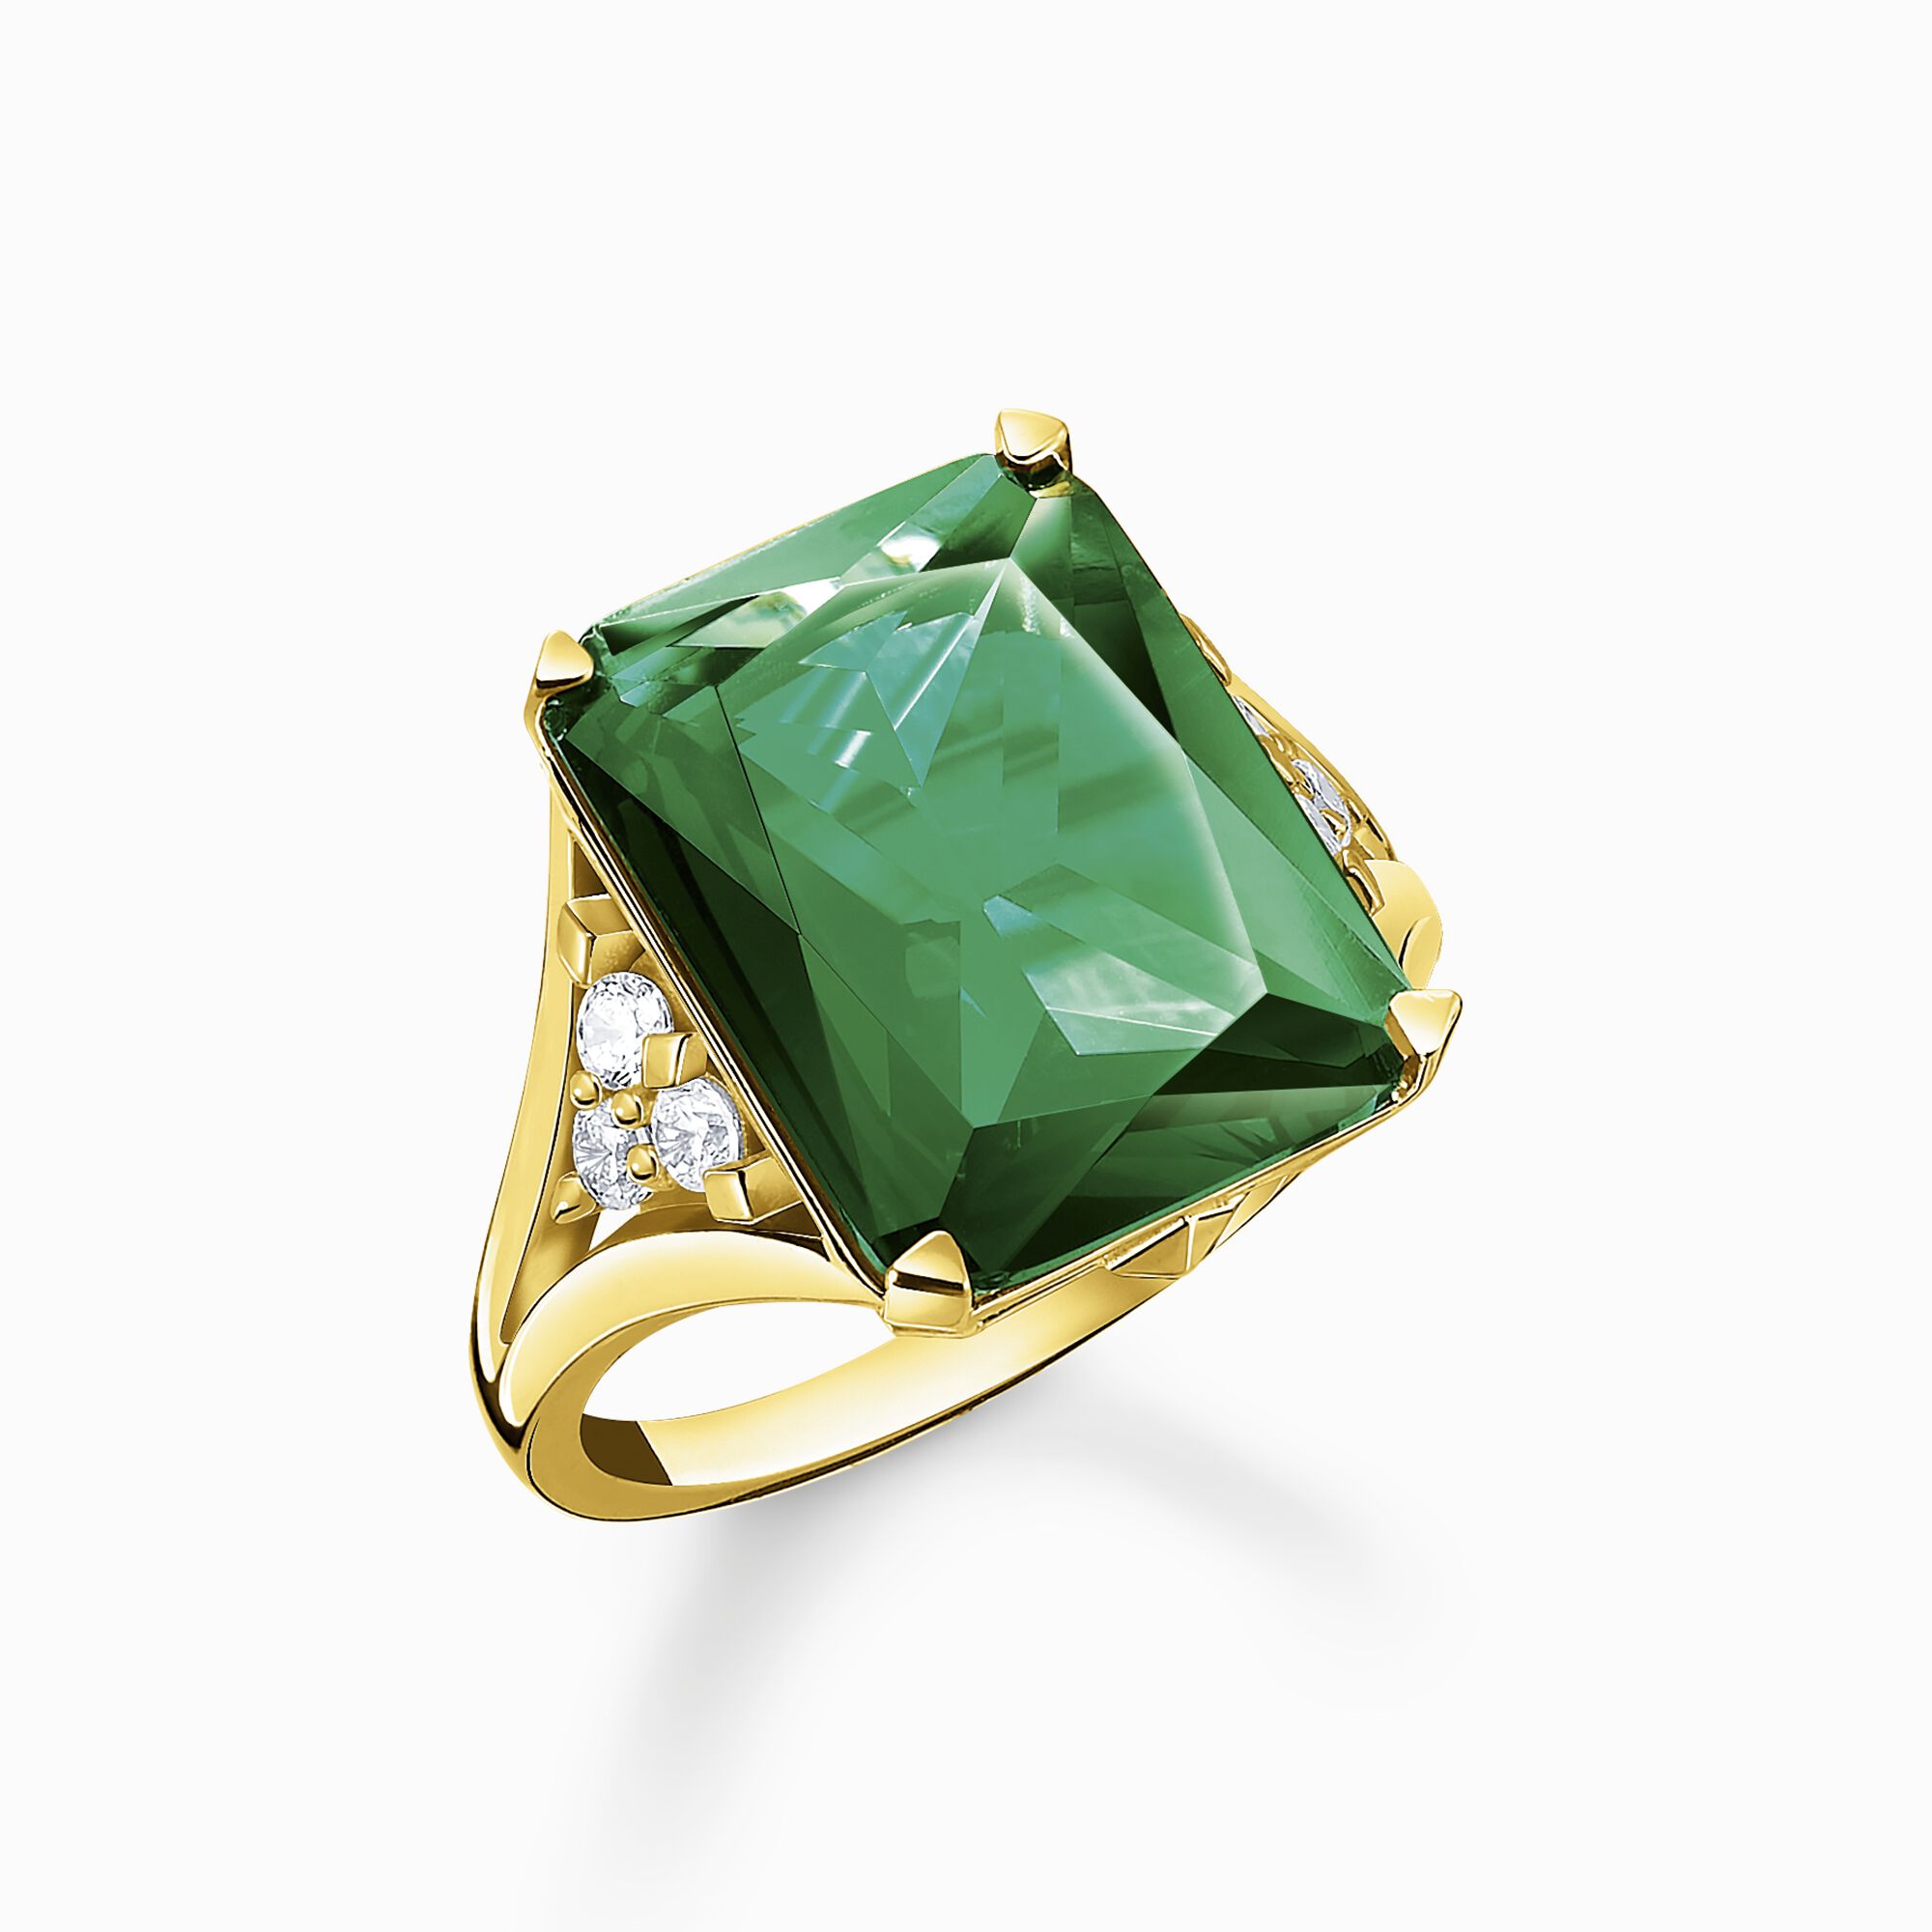 Thomas Sabo + Gold Plated Ring With Green and White Stones